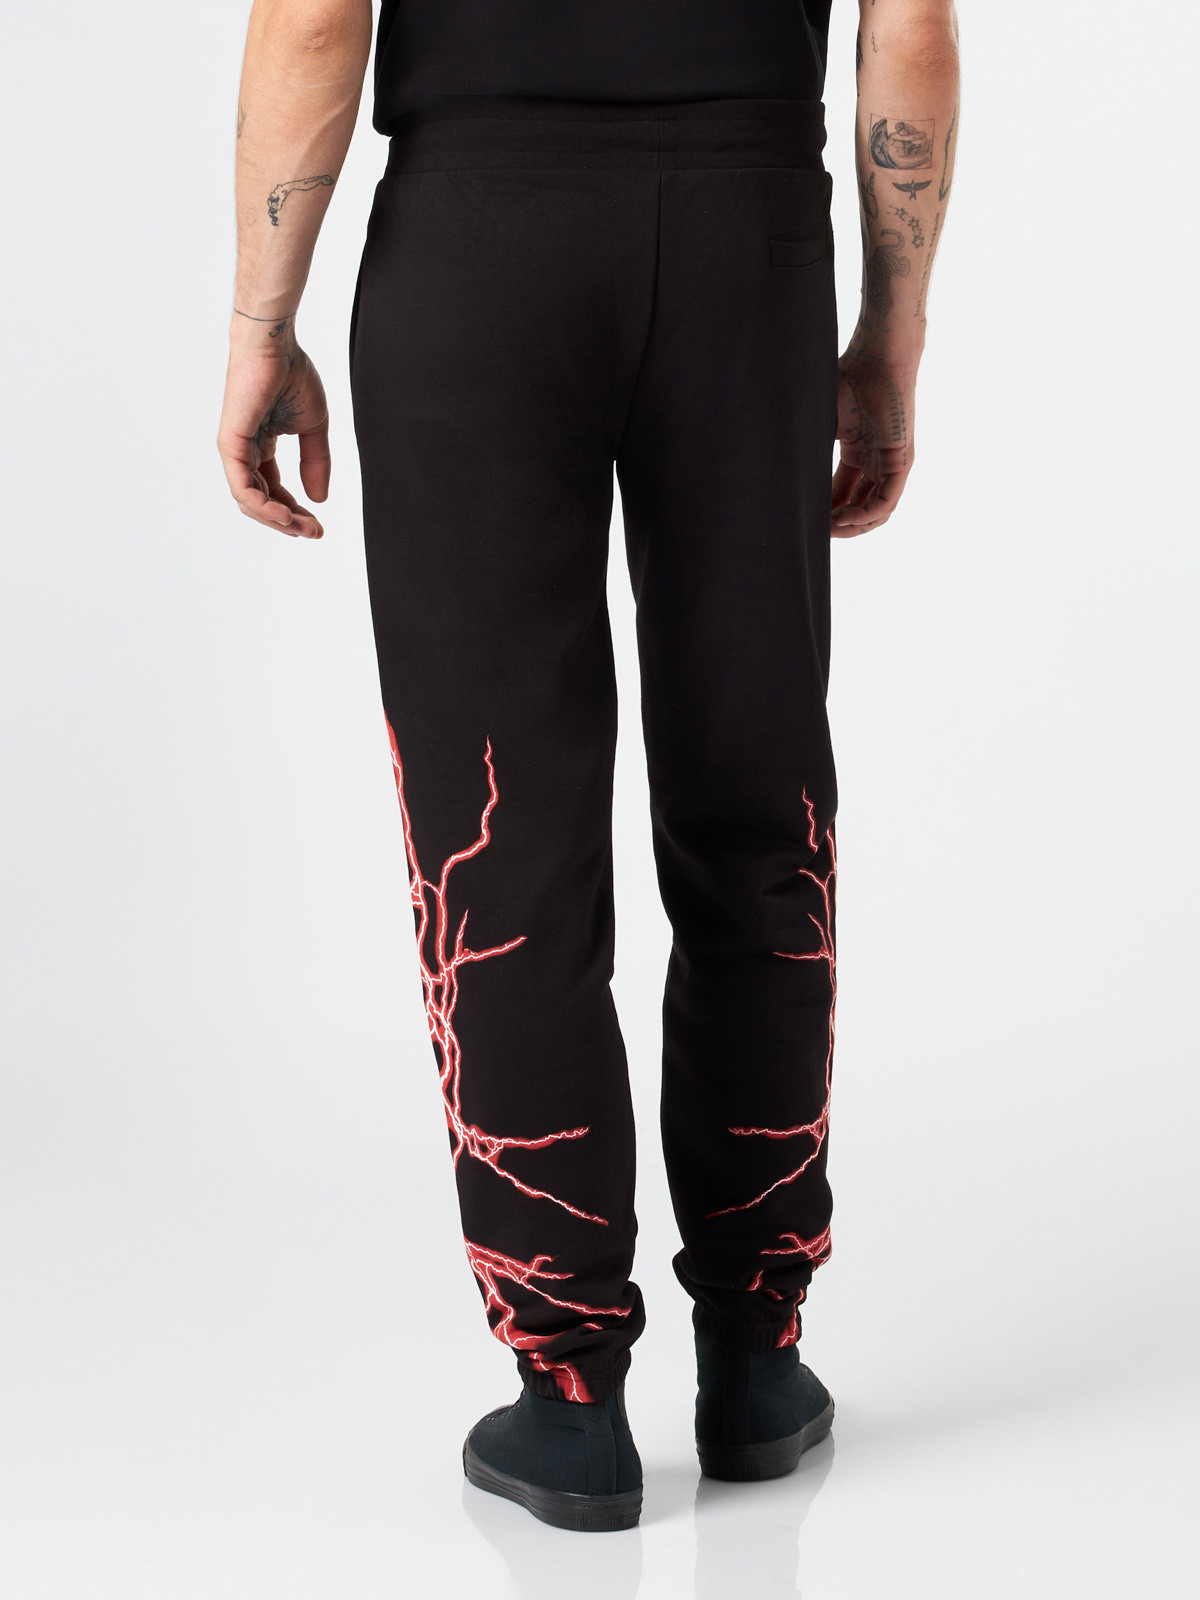 Phobia - Cotton trousers with lightning bolt print, Black, large image number 2